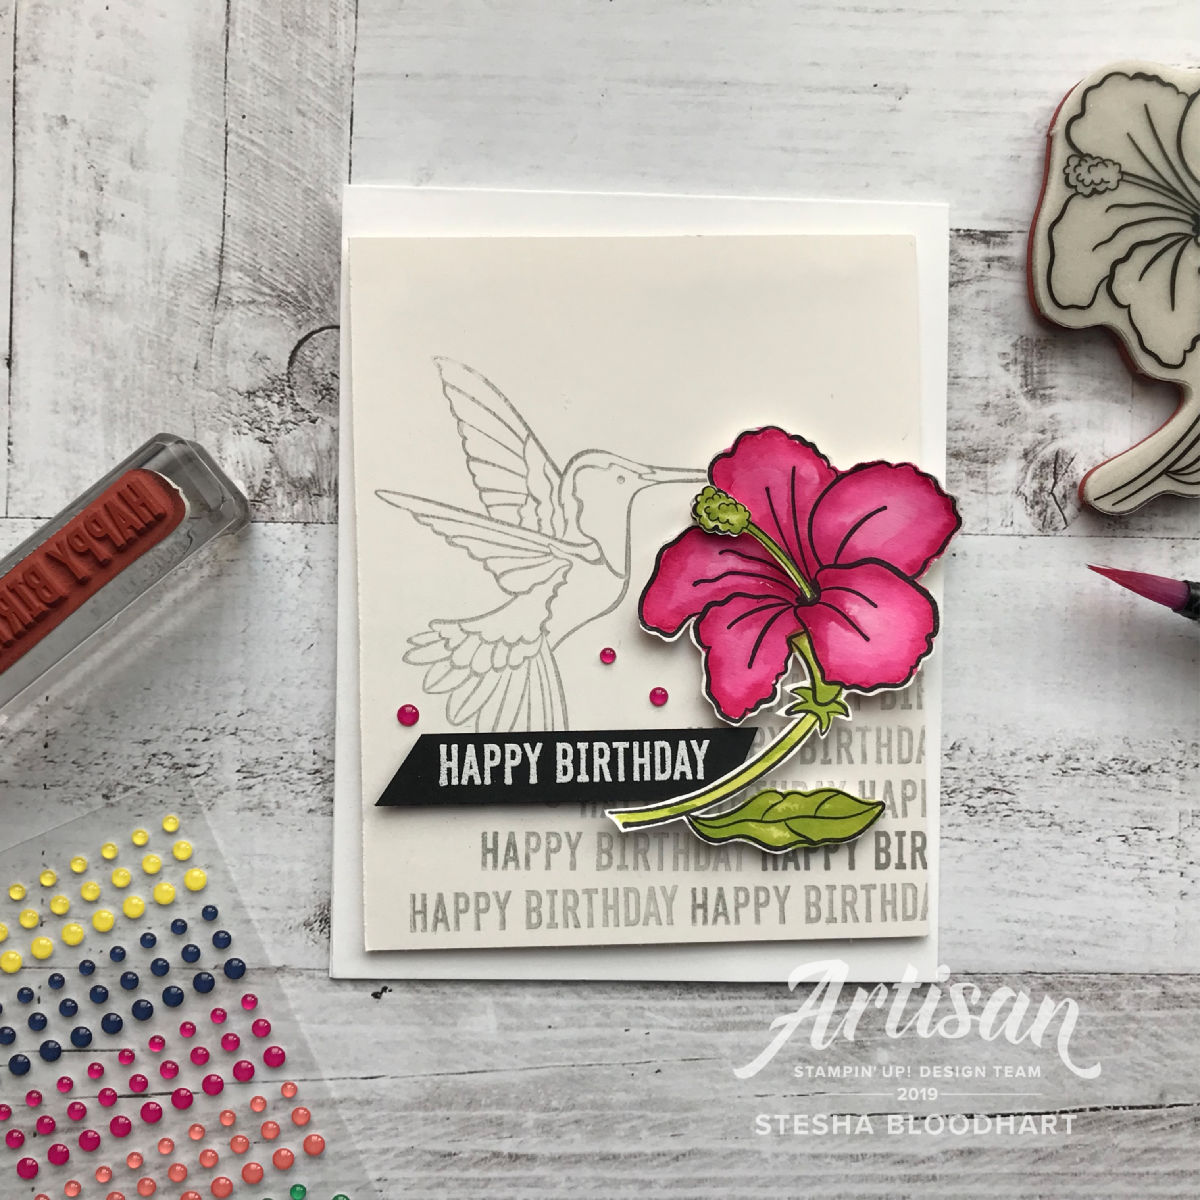 Humming Along and Itty Bitty Birthdays Cling Stamp Sets by Stampin' Up! Card Created by Artisan Stesha Bloodhart, Stampin' Hoot! for the #tgifc193 Color Challenge